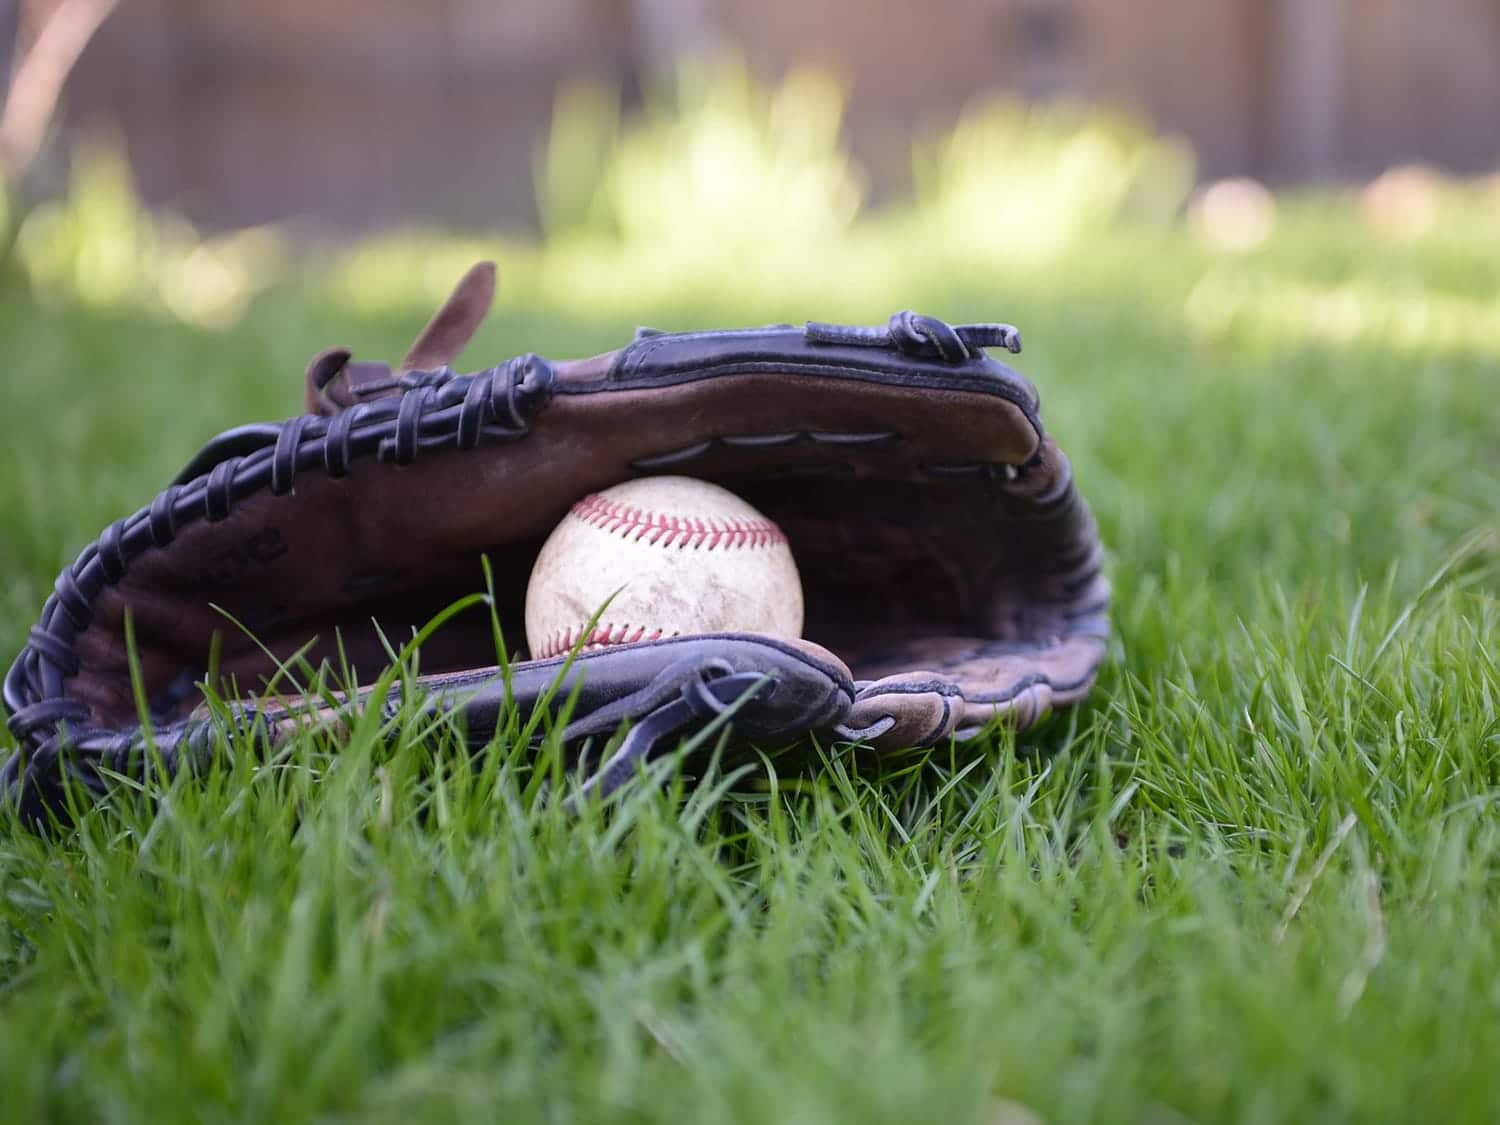 Baseball in a glove on the grass